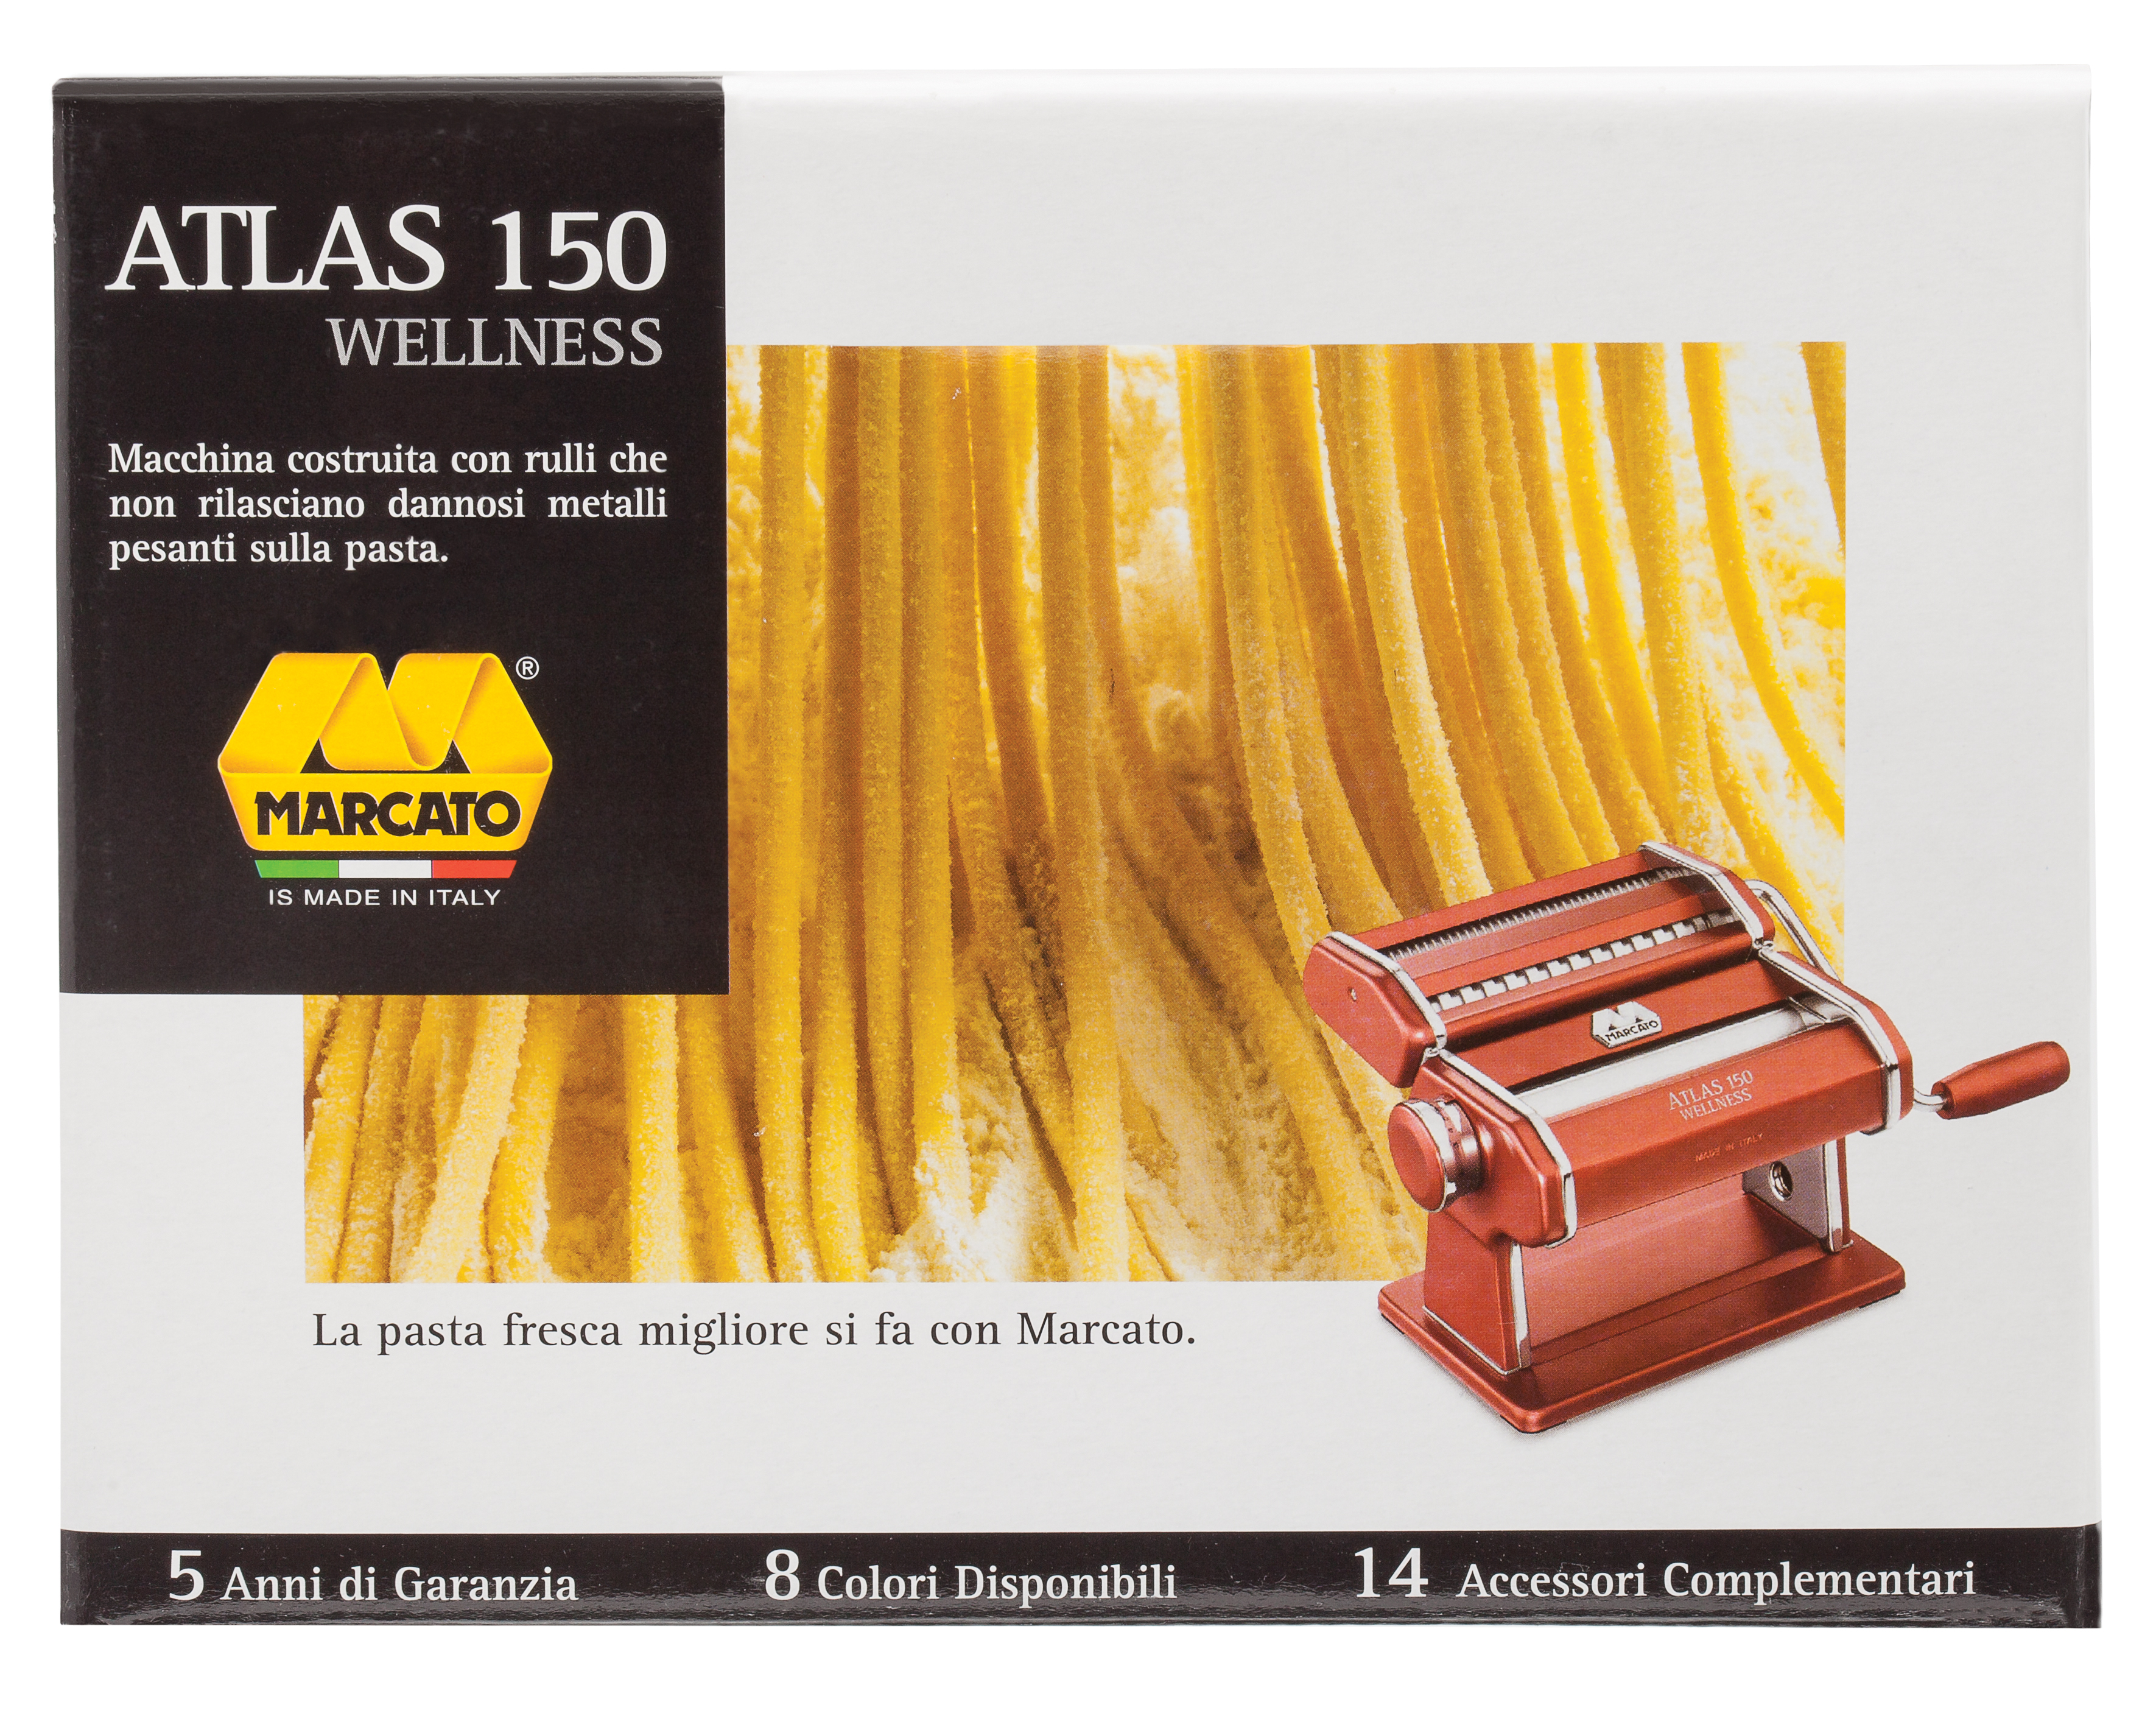 Marcato Atlas 150 Machine with Pasta Cutter, Hand Crank, and Instructions, Made in Italy, Red - image 2 of 3